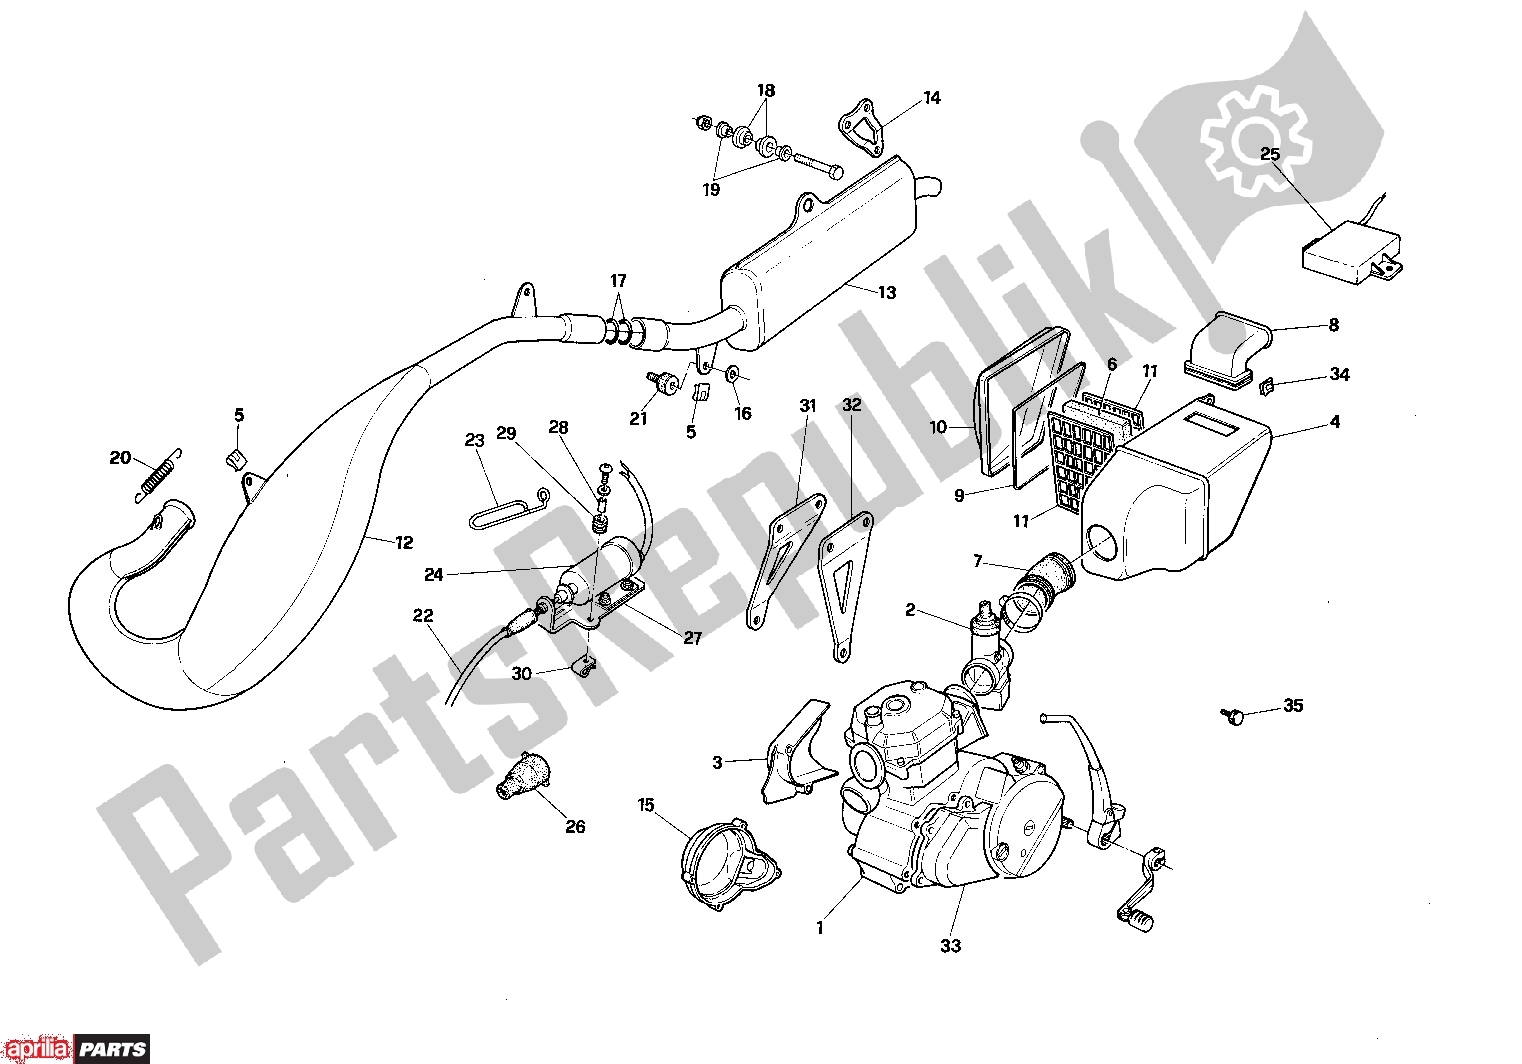 All parts for the Exhaust of the Aprilia Tuareg Rally 105 125 1989 - 1992